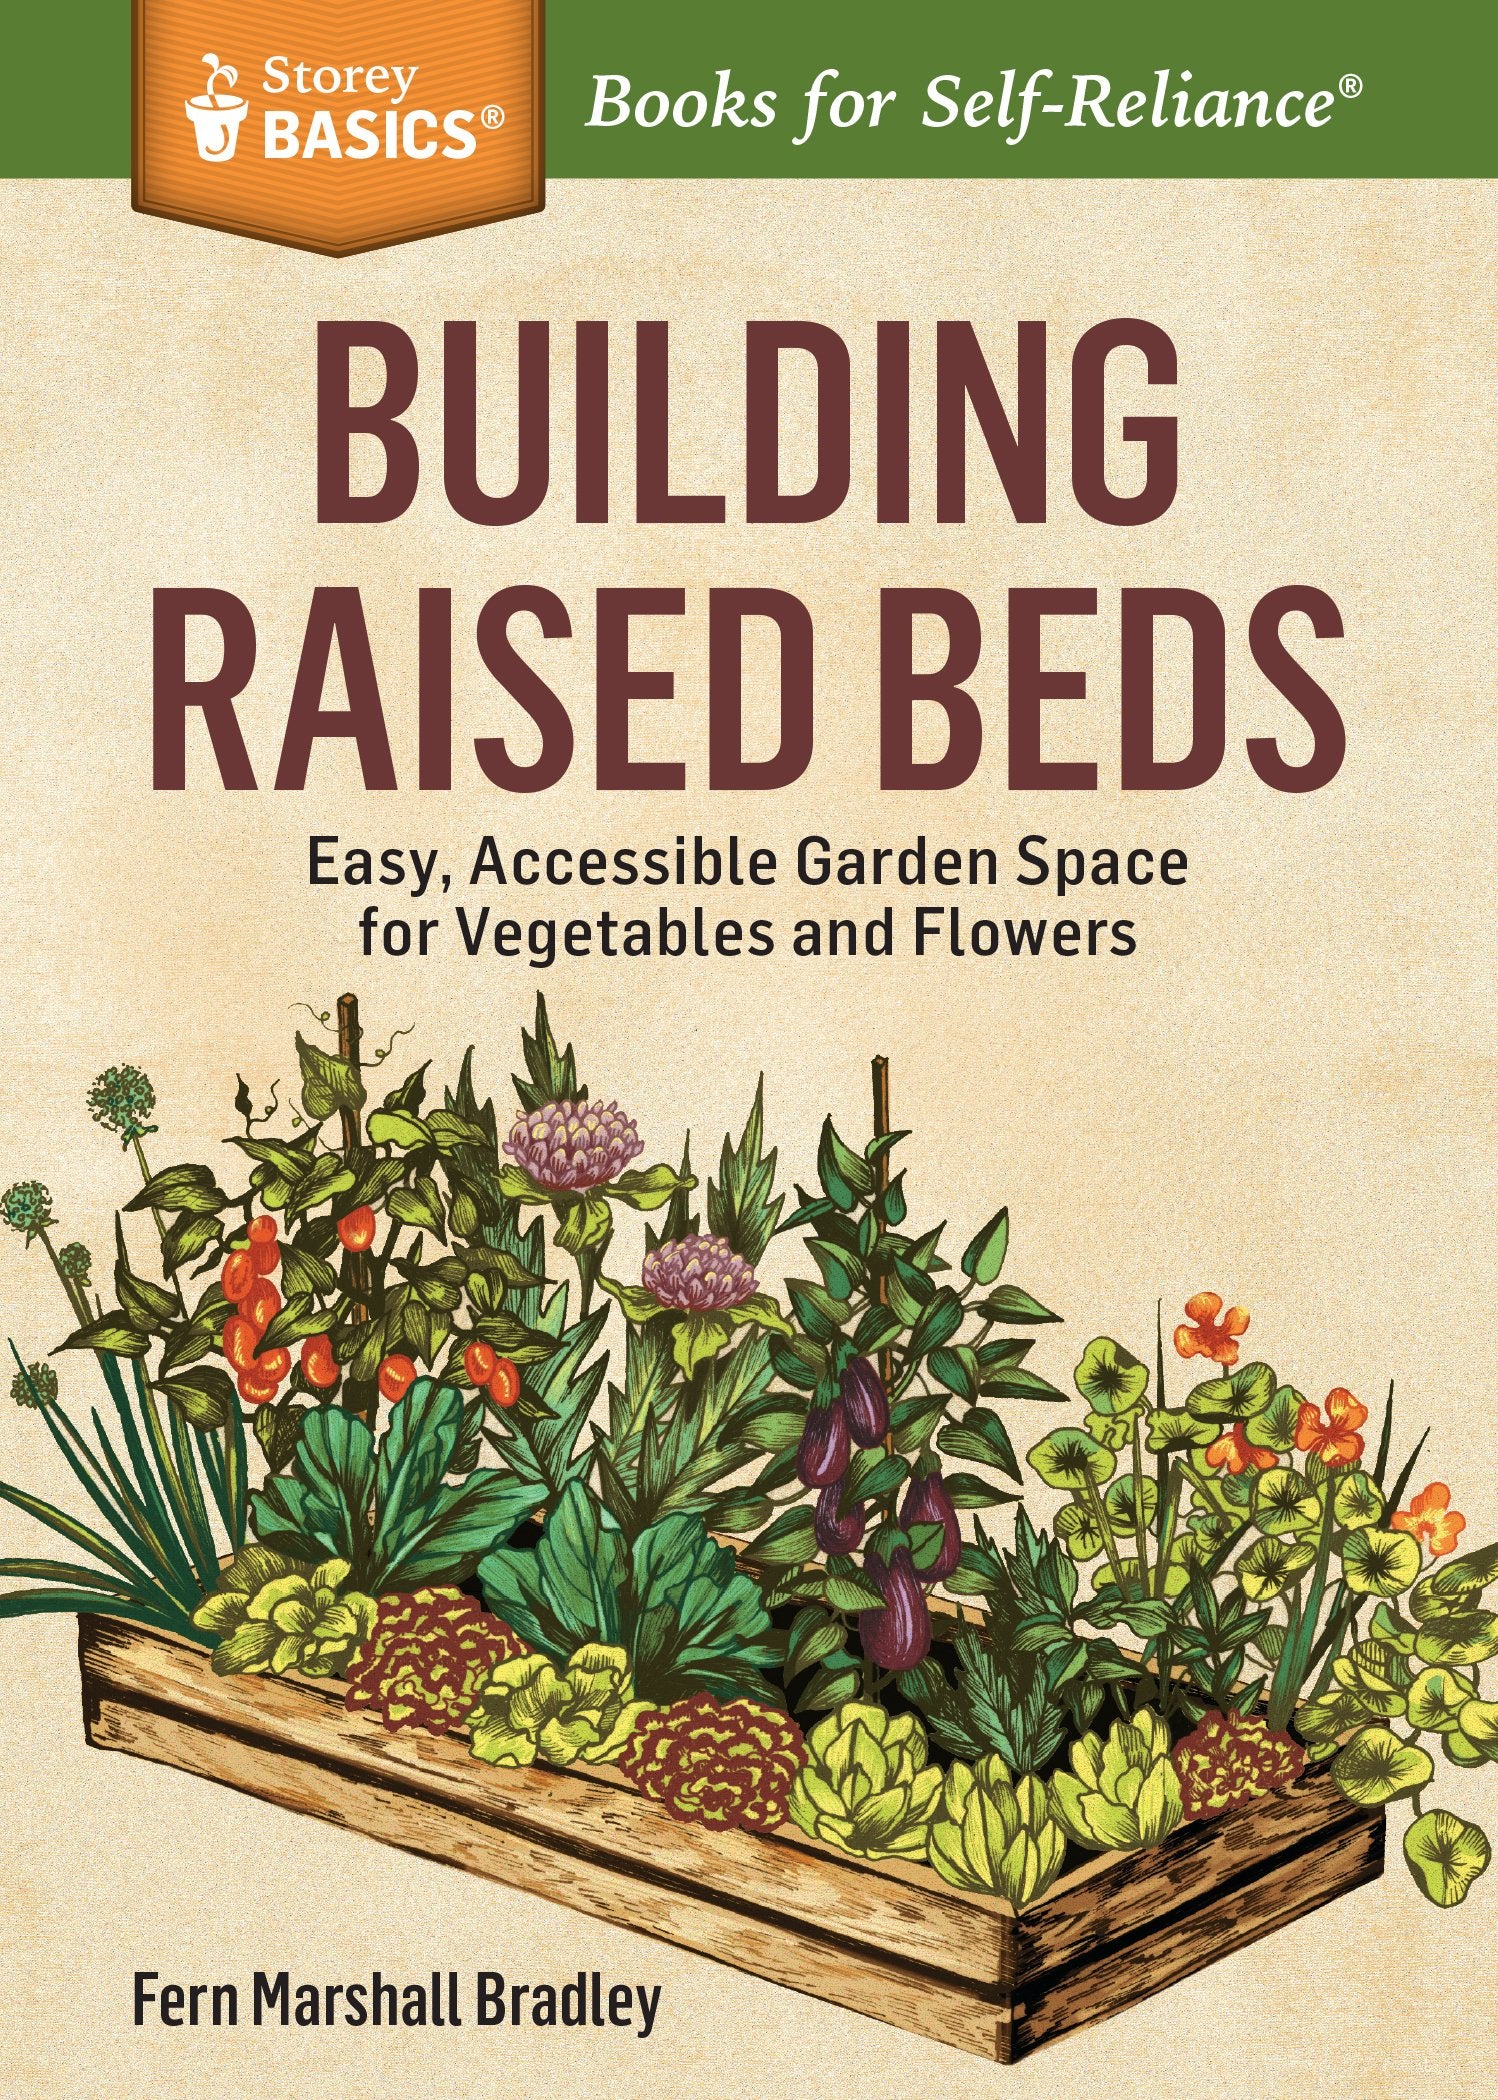 Building Raised Beds: Easy, Accessible Garden Space for Vegetables and Flowers. A Storey BASICS? Title